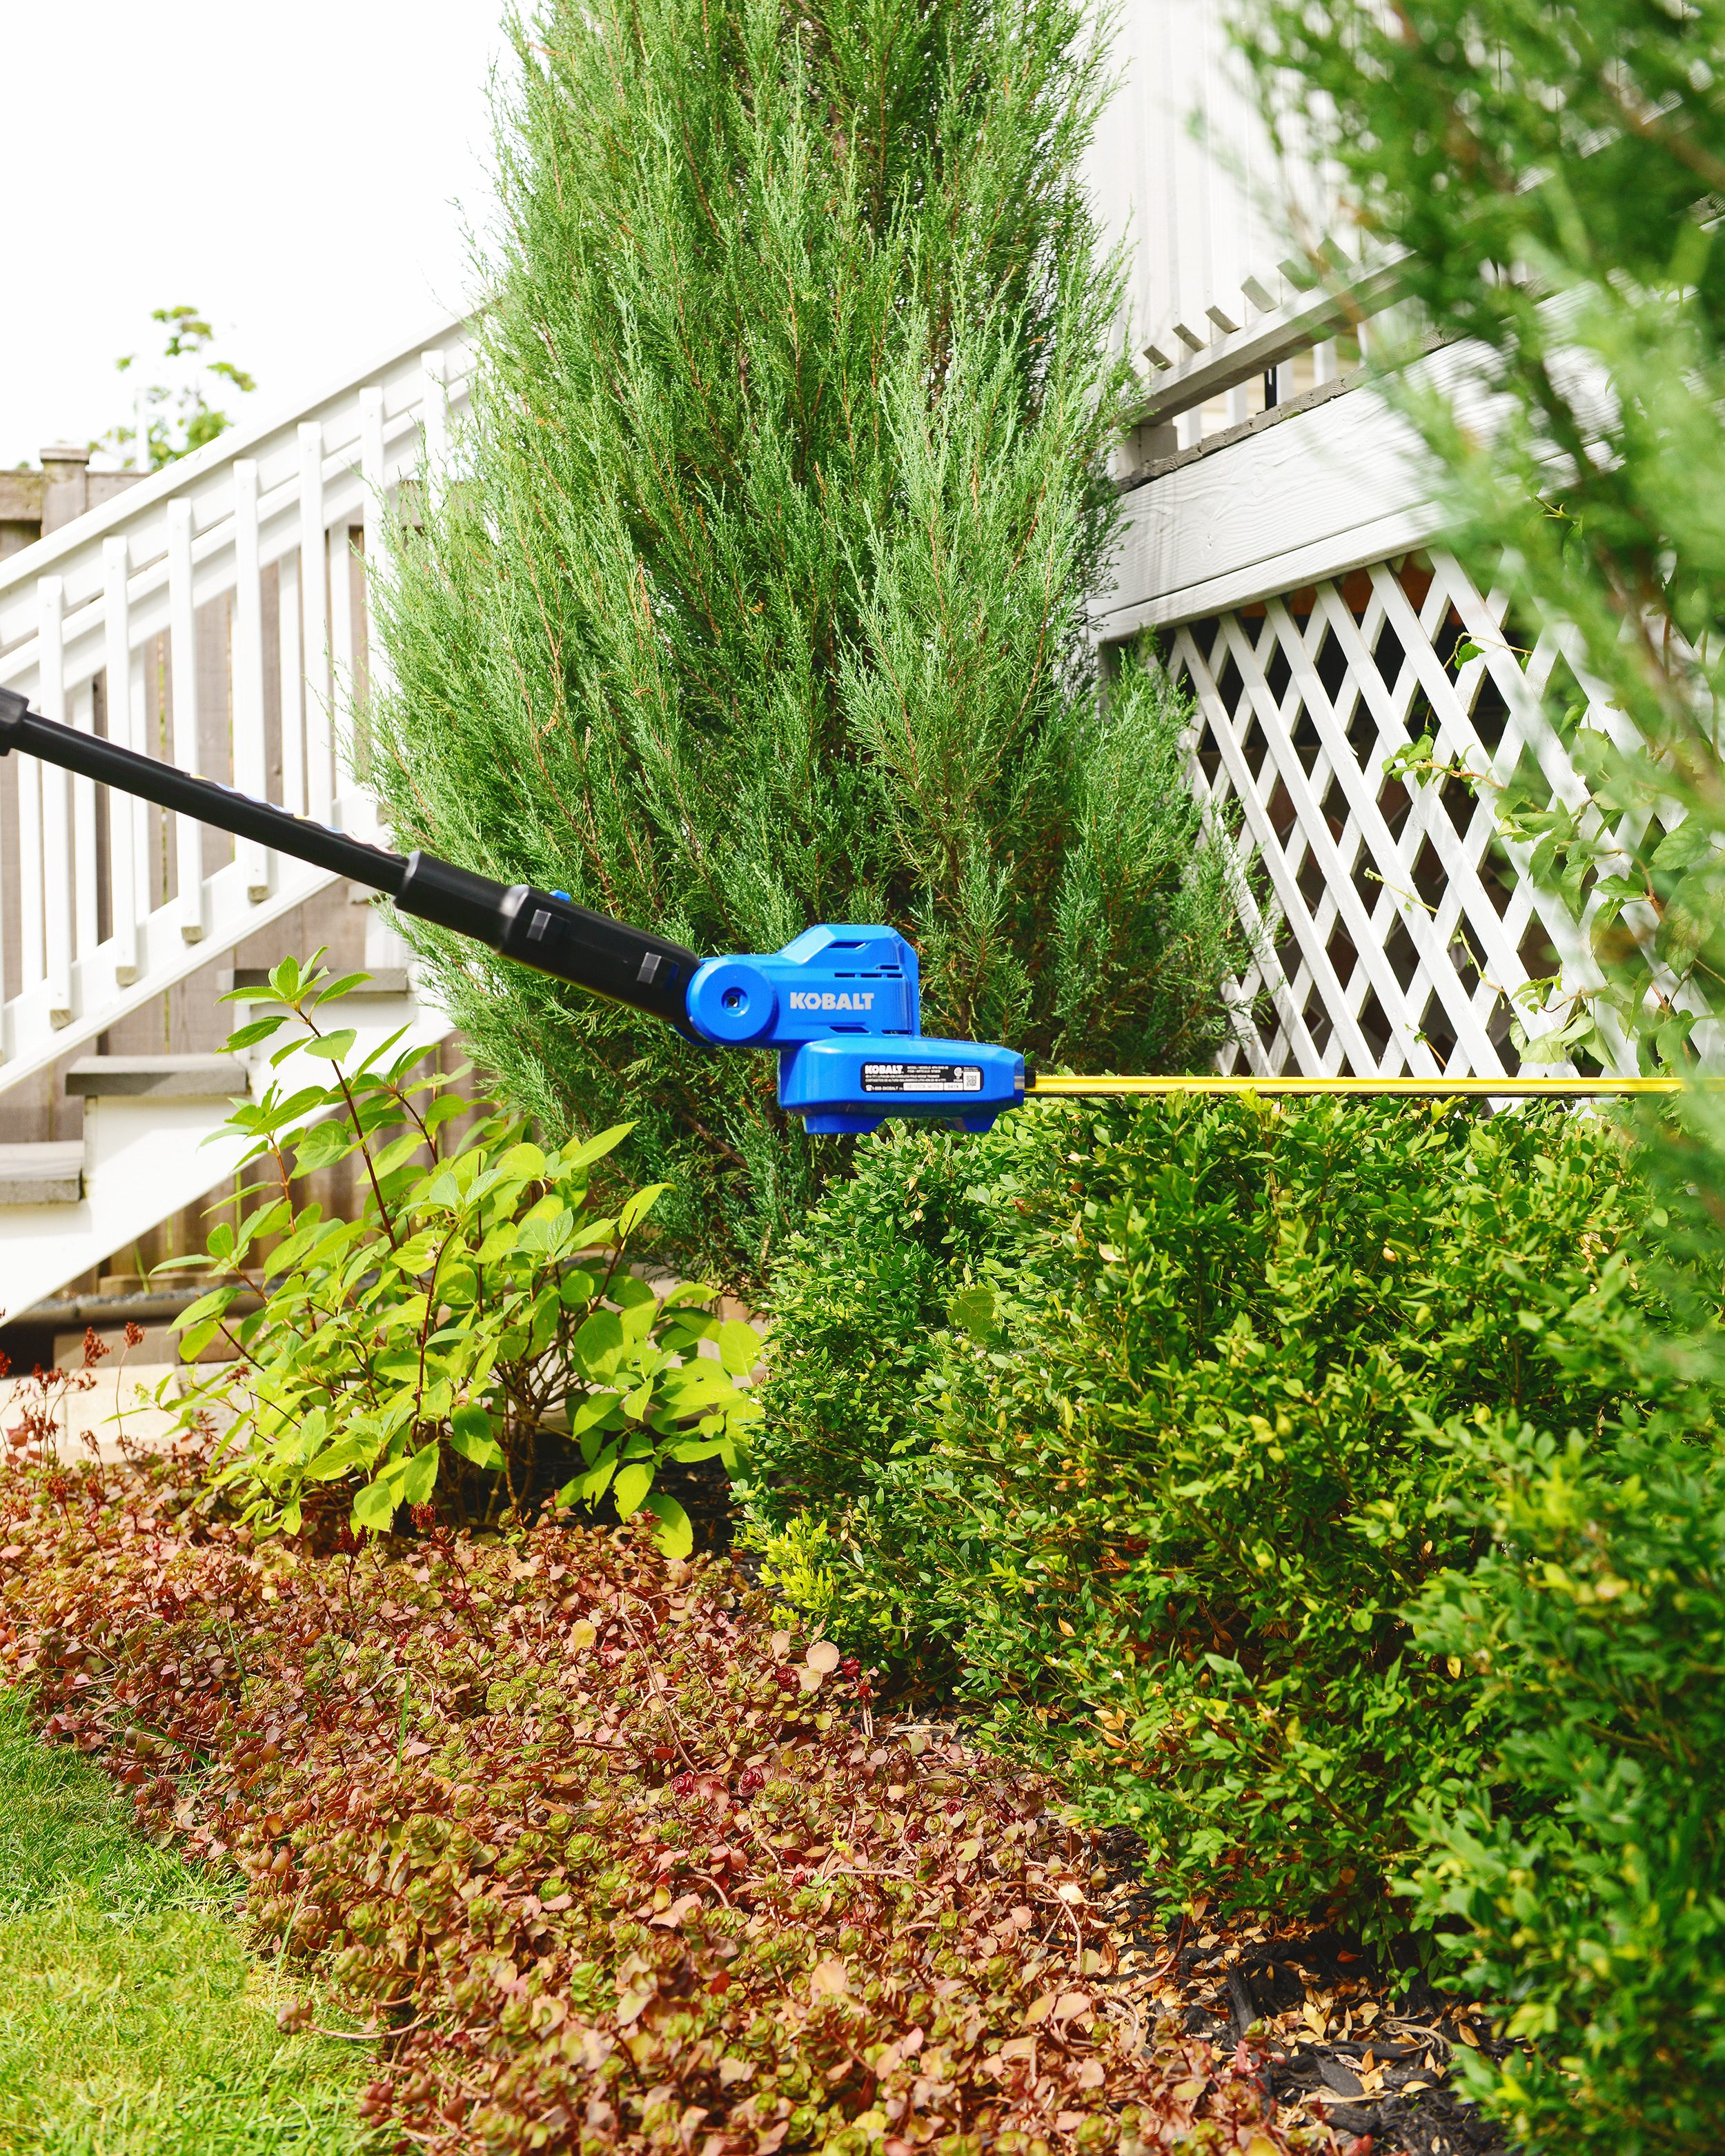 Going Green for Fall Yard Cleanup, using battery powered lawn tools to reduce environmental impact | via Yellow Brick Home